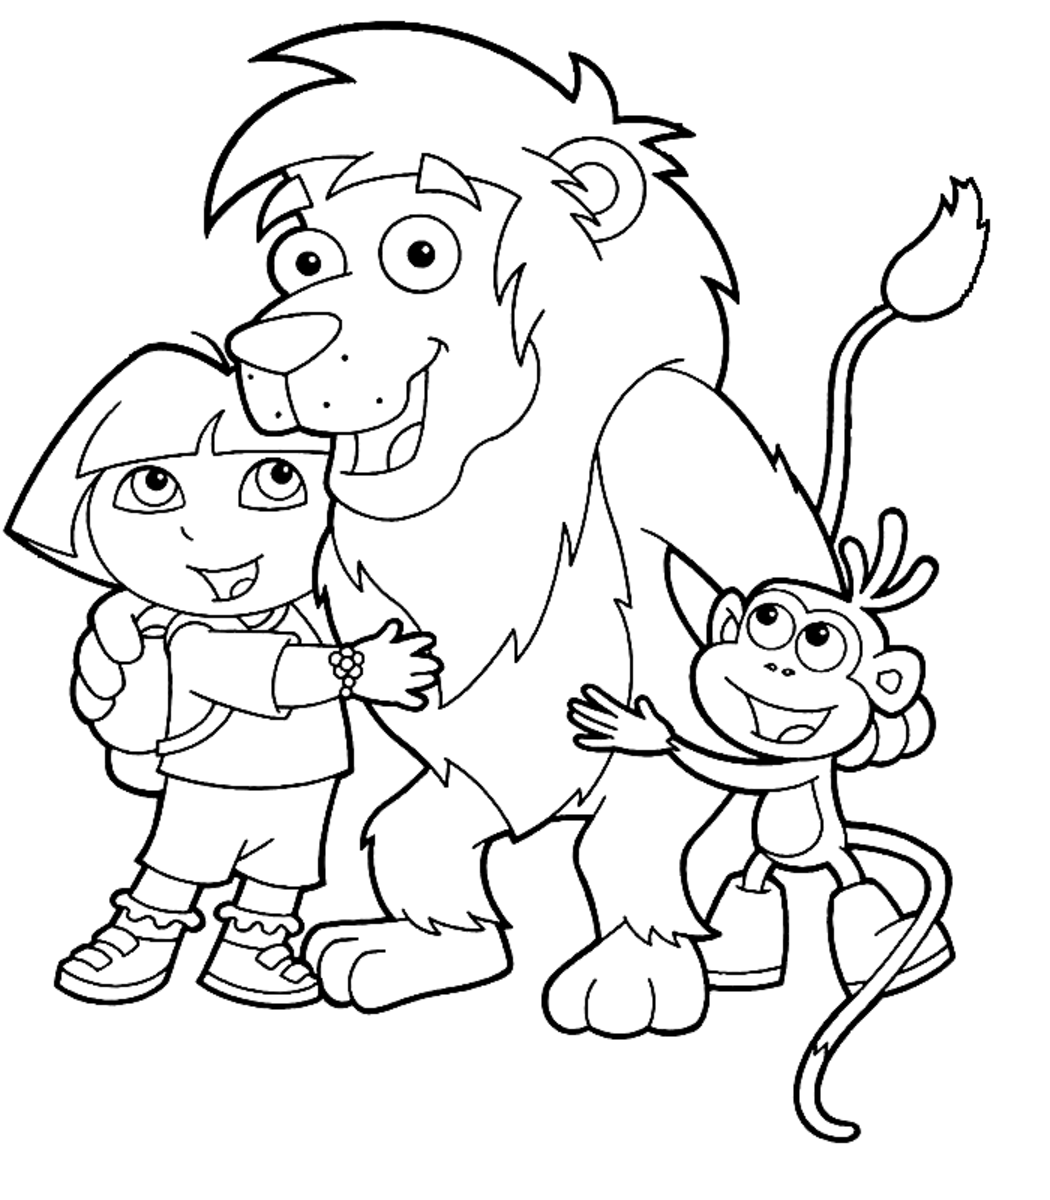 Dora The Explorer Coloring Page For Kids 34 Coloring - vrogue.co